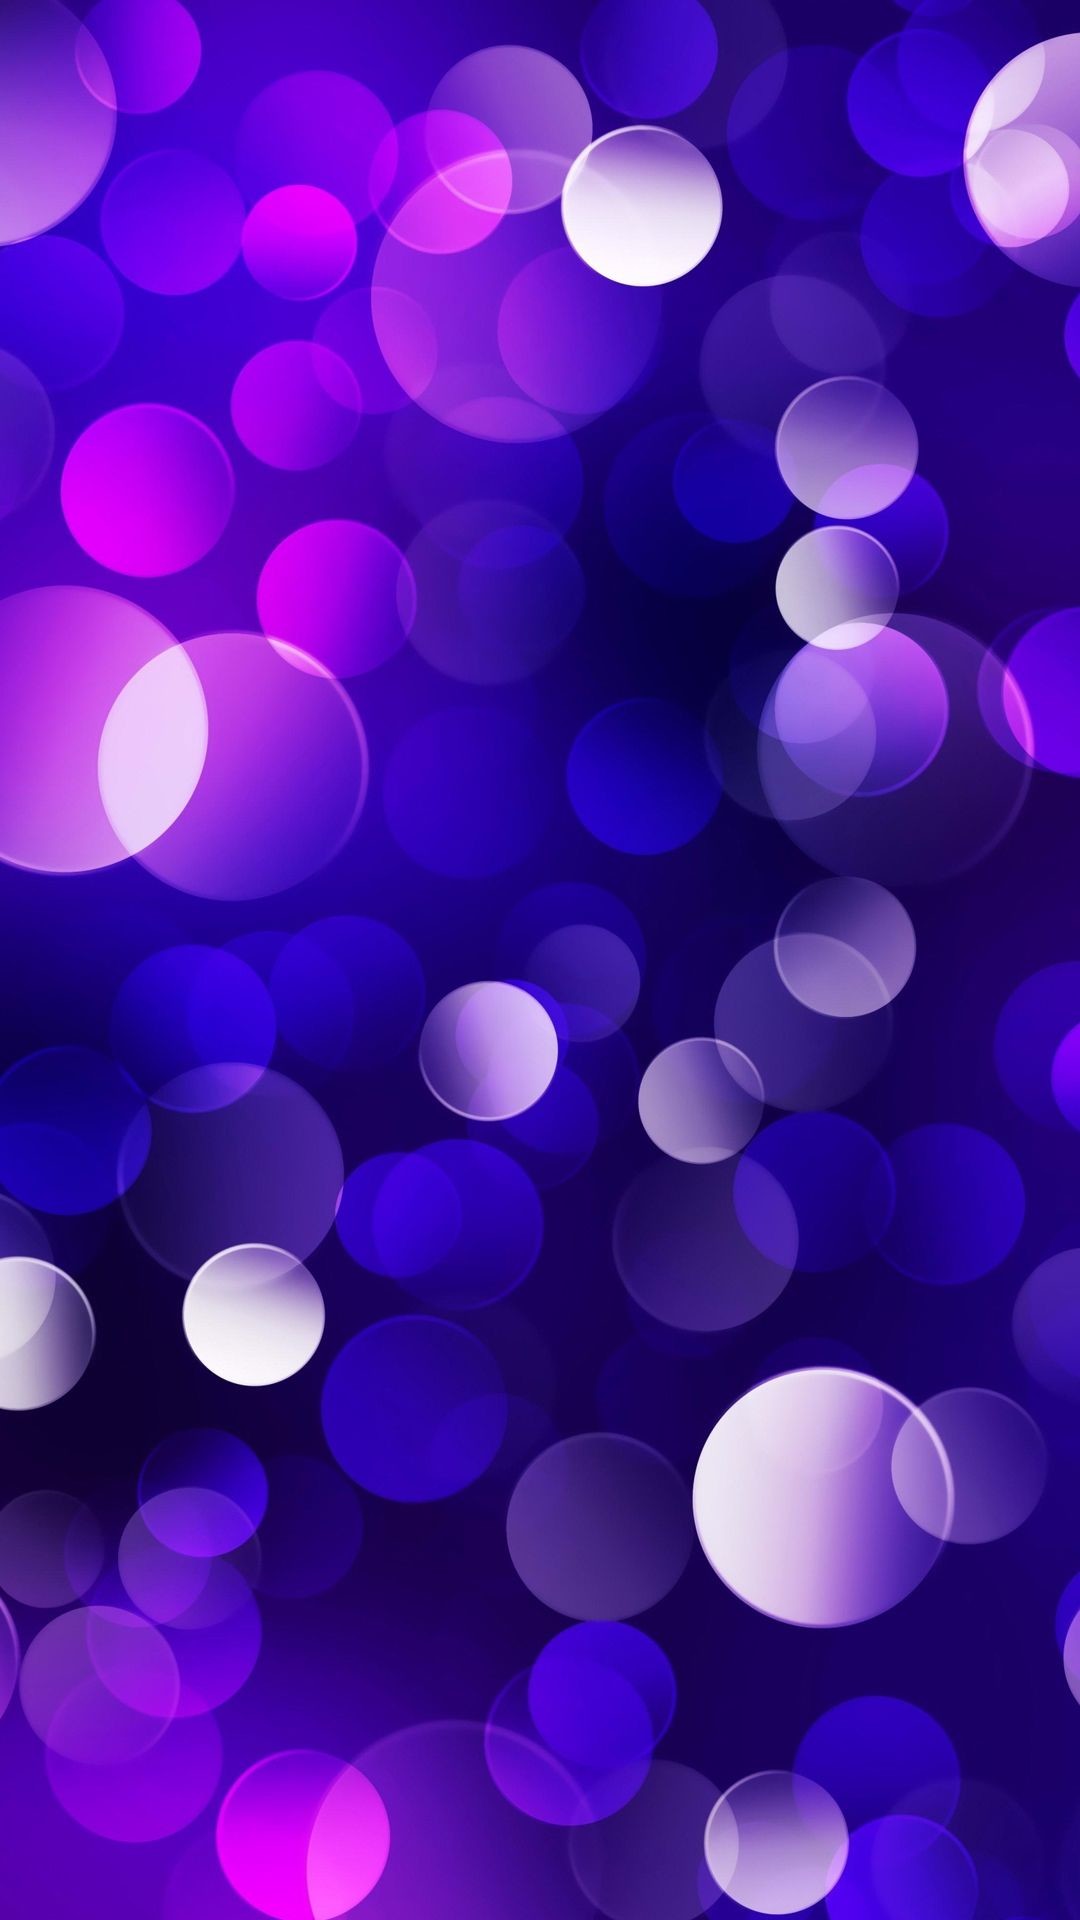 1080x1920 Elegant Glowing Purple Blue Bubble iPhone 6+ HD Wallpaper -  http://helpyourselfimages